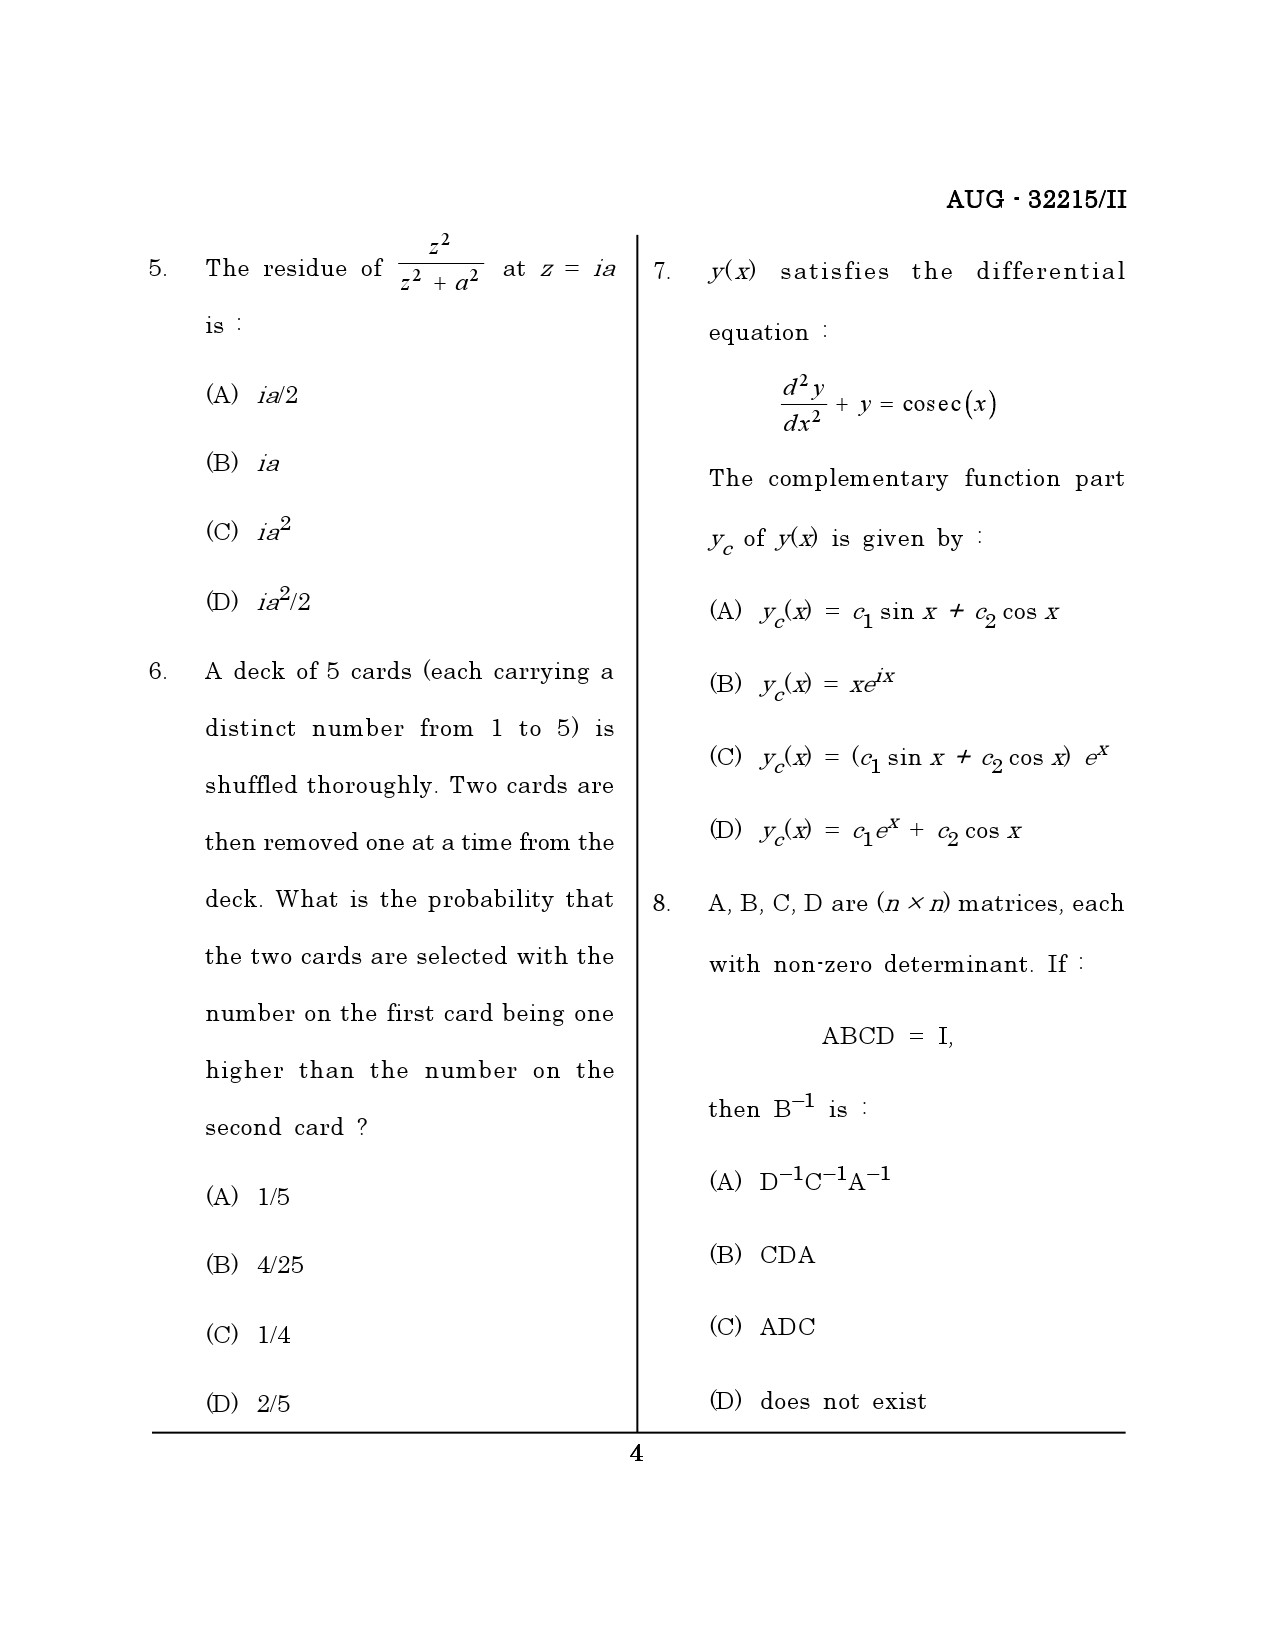 Maharashtra SET Physical Science Question Paper II August 2015 3